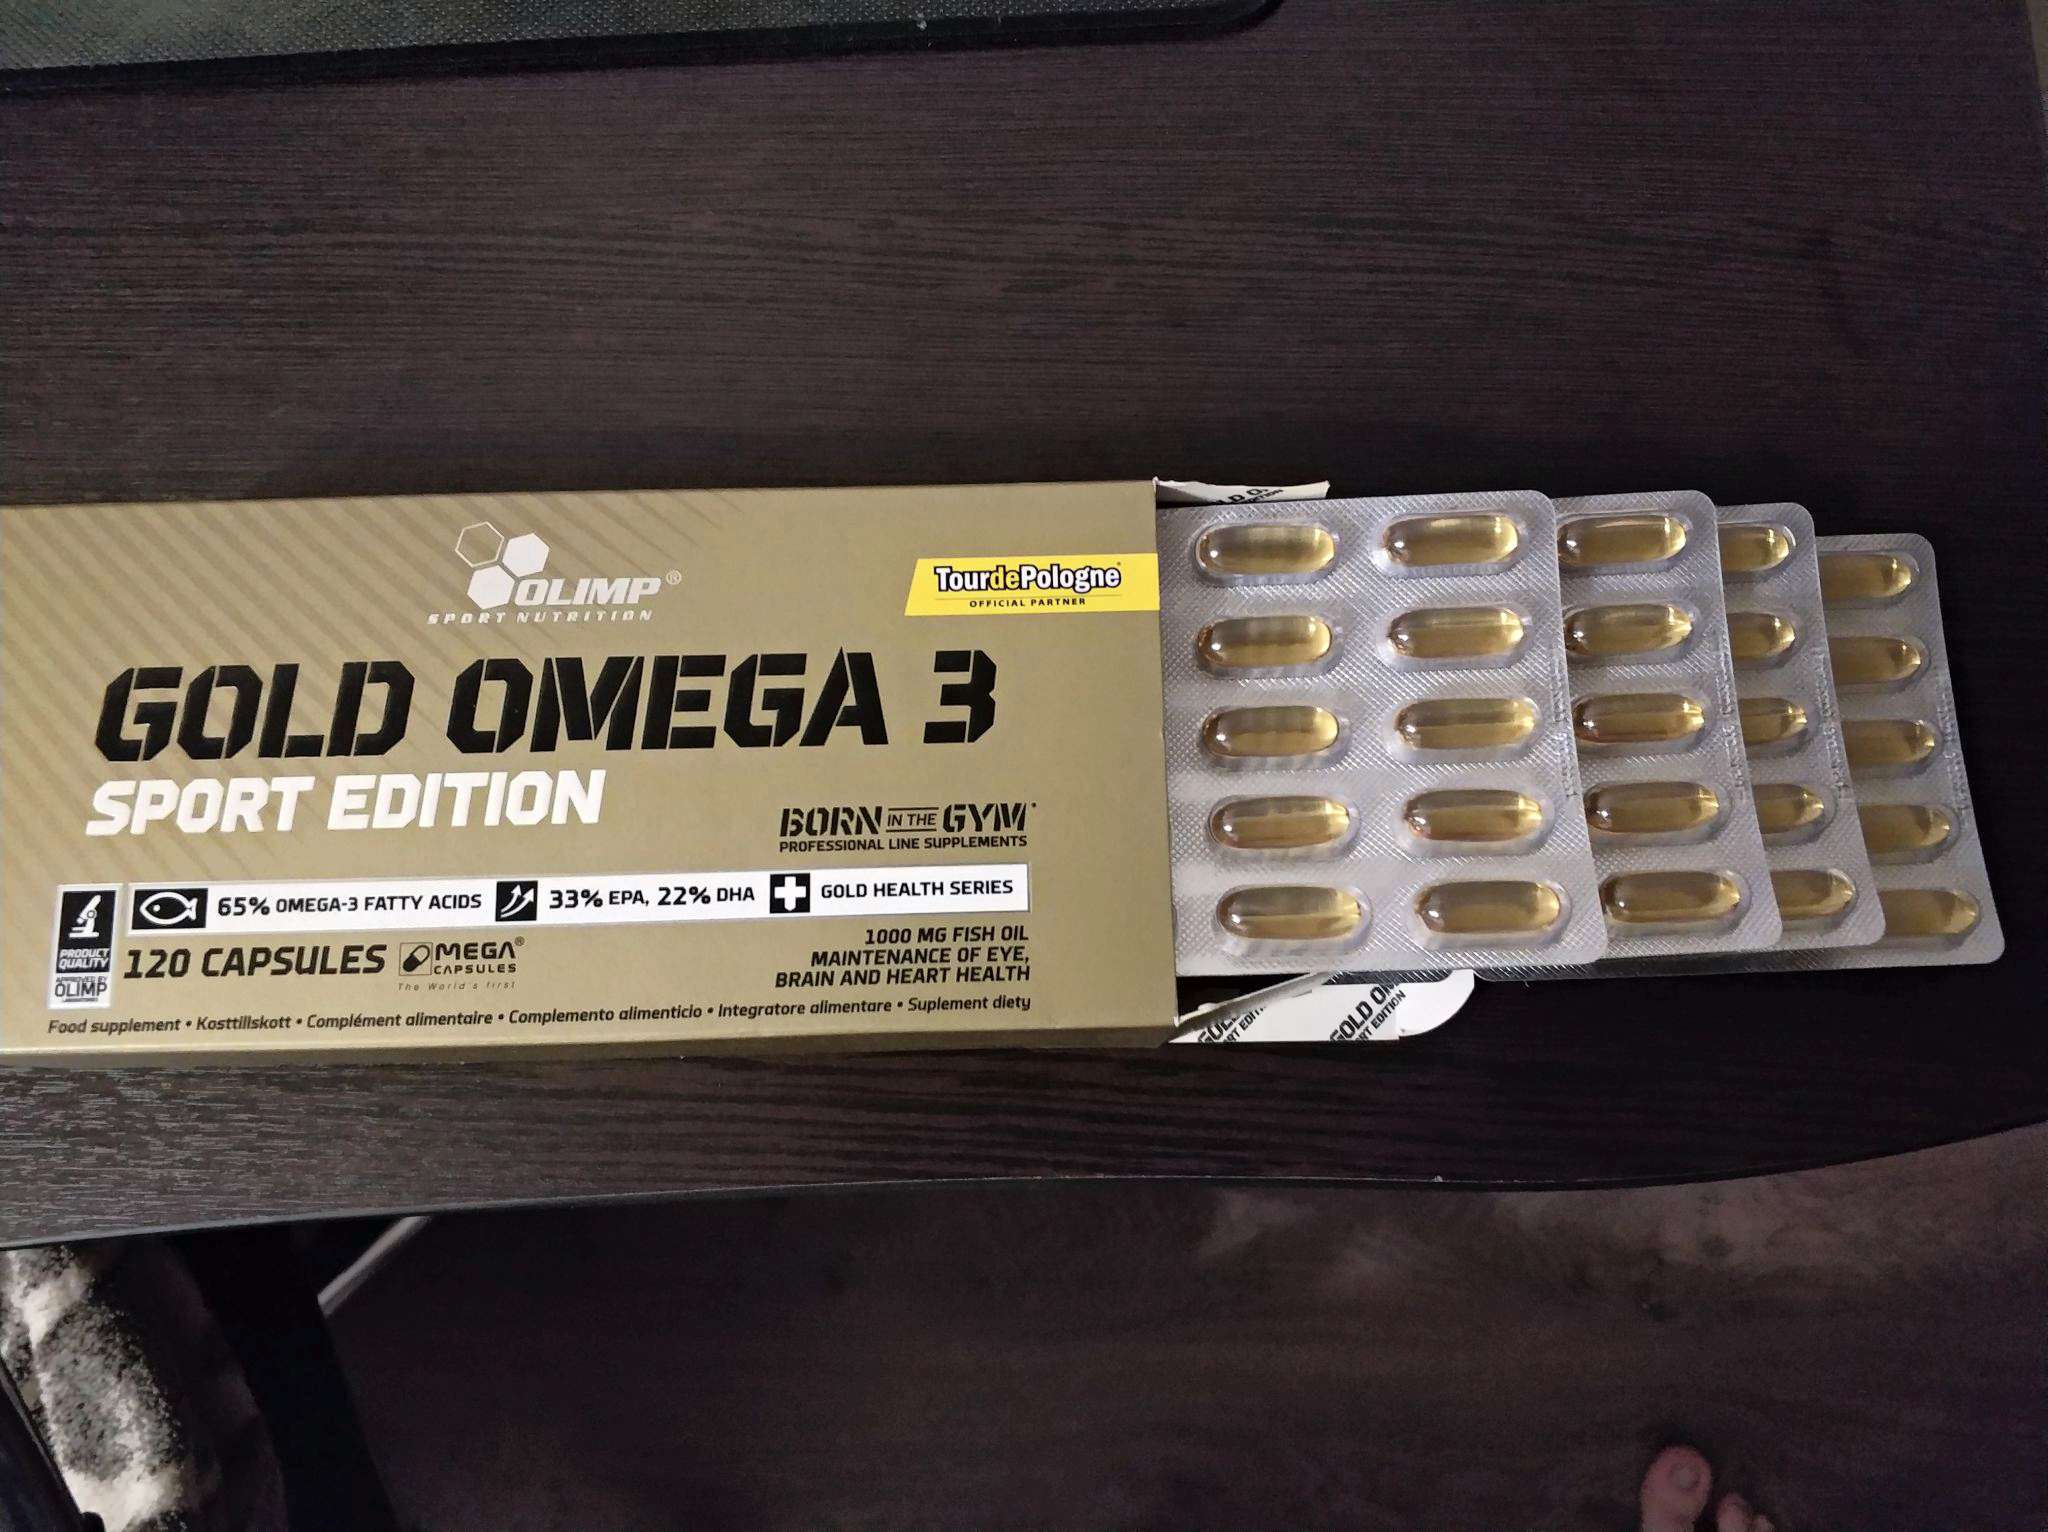 Omega 3 gold капсулы. Gold Omega 3 Sport Edition капсулы. Омега 3 Голд. Олимп Голд Омега 3. Омега 3 Голд спорт.